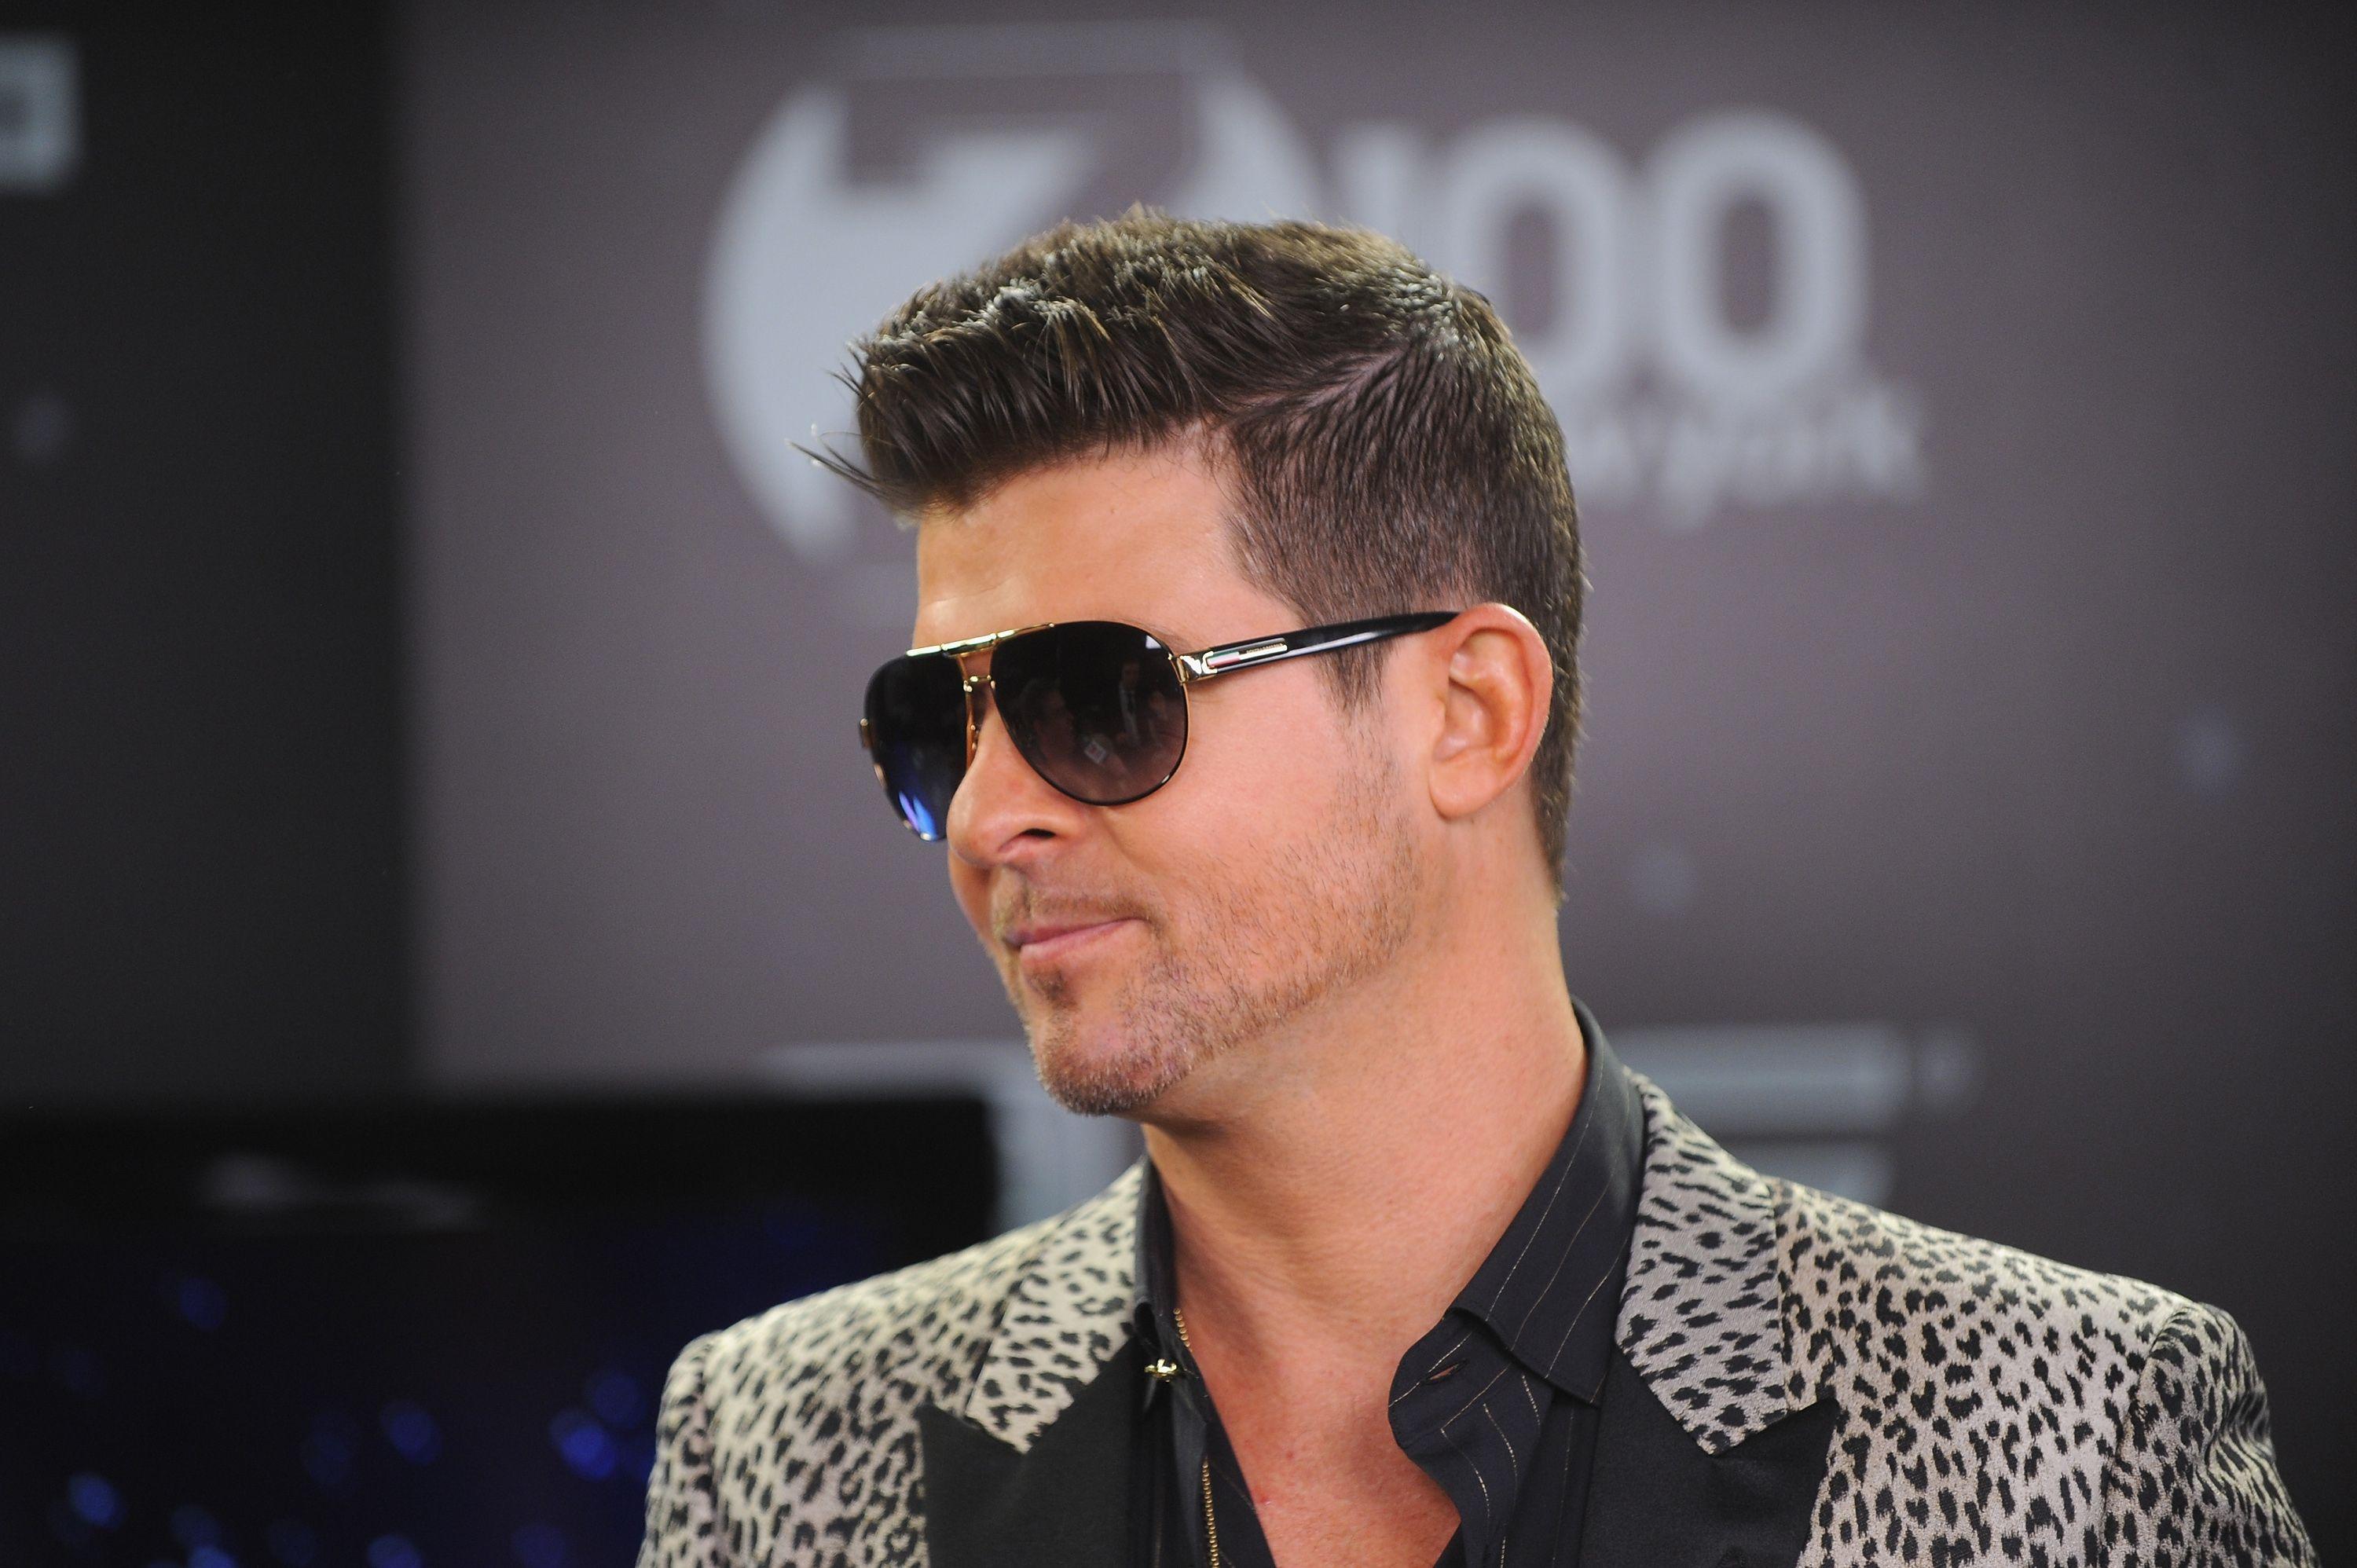 Robin Thicke Wallpaper Image Photo Picture Background